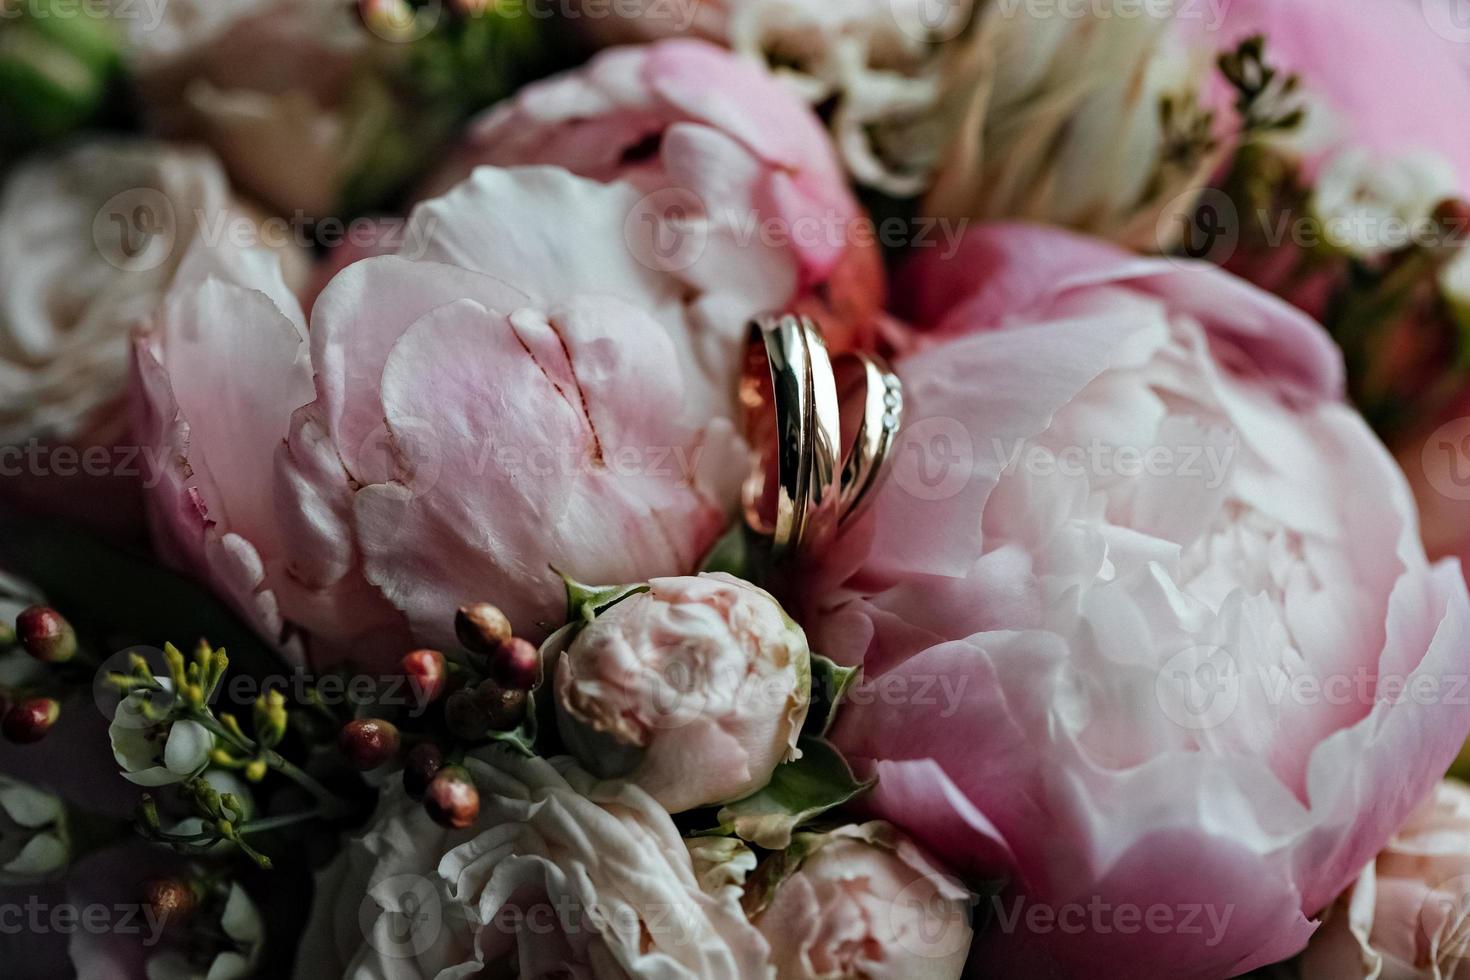 Wedding rings with a bouquet of flowers.Marriage proposal. Wedding photo